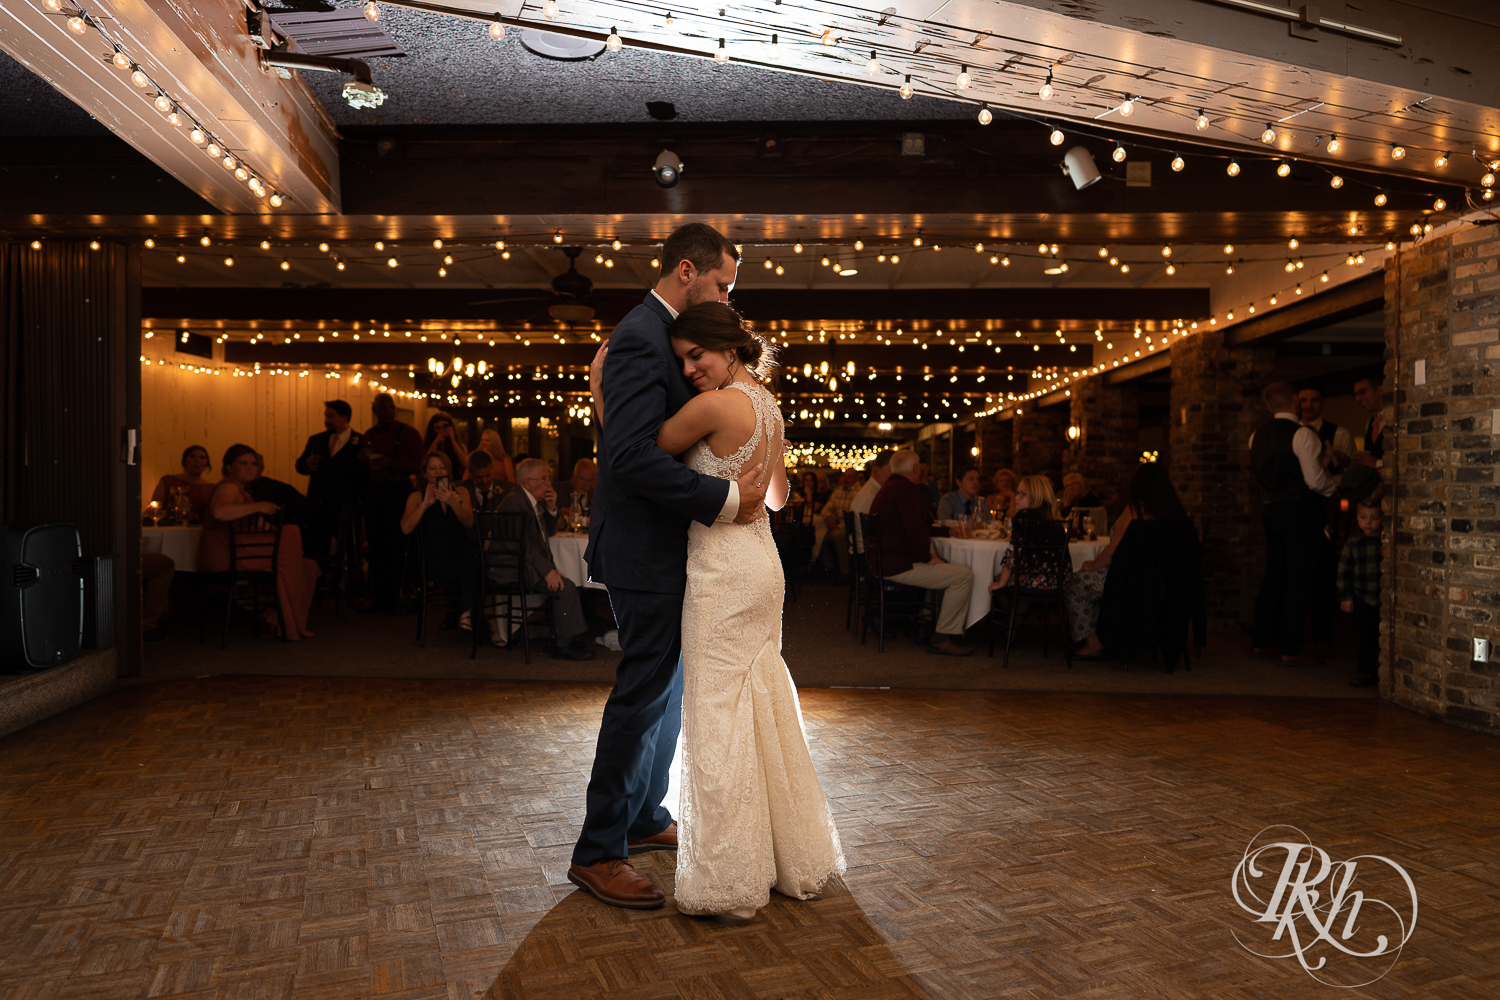 Bride and groom share first dance during reception at The Chart House in Lakeville, Minnesota.